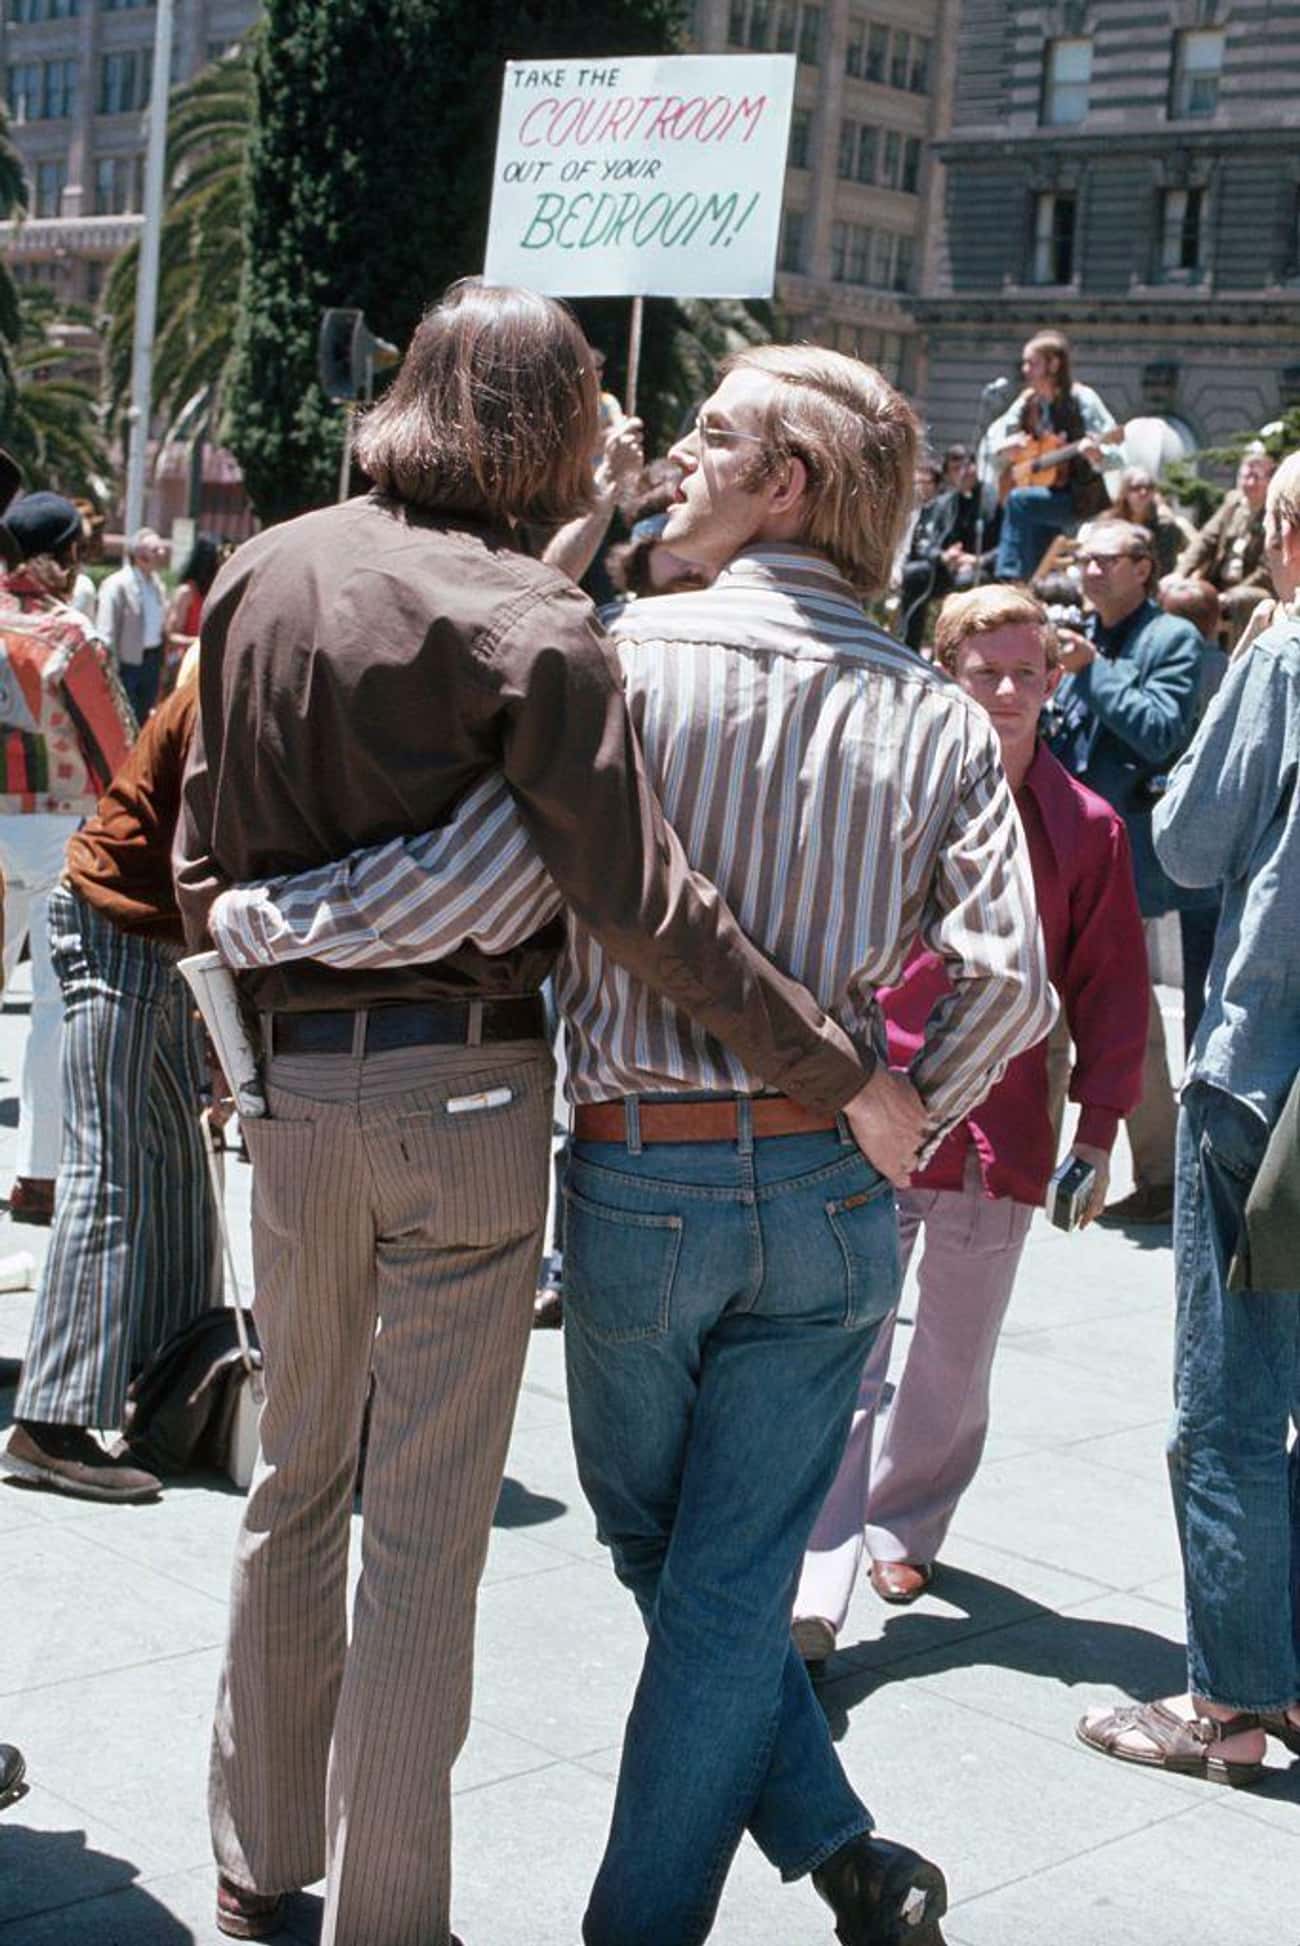 A Couple At A Rally In San Francisco, 1960s